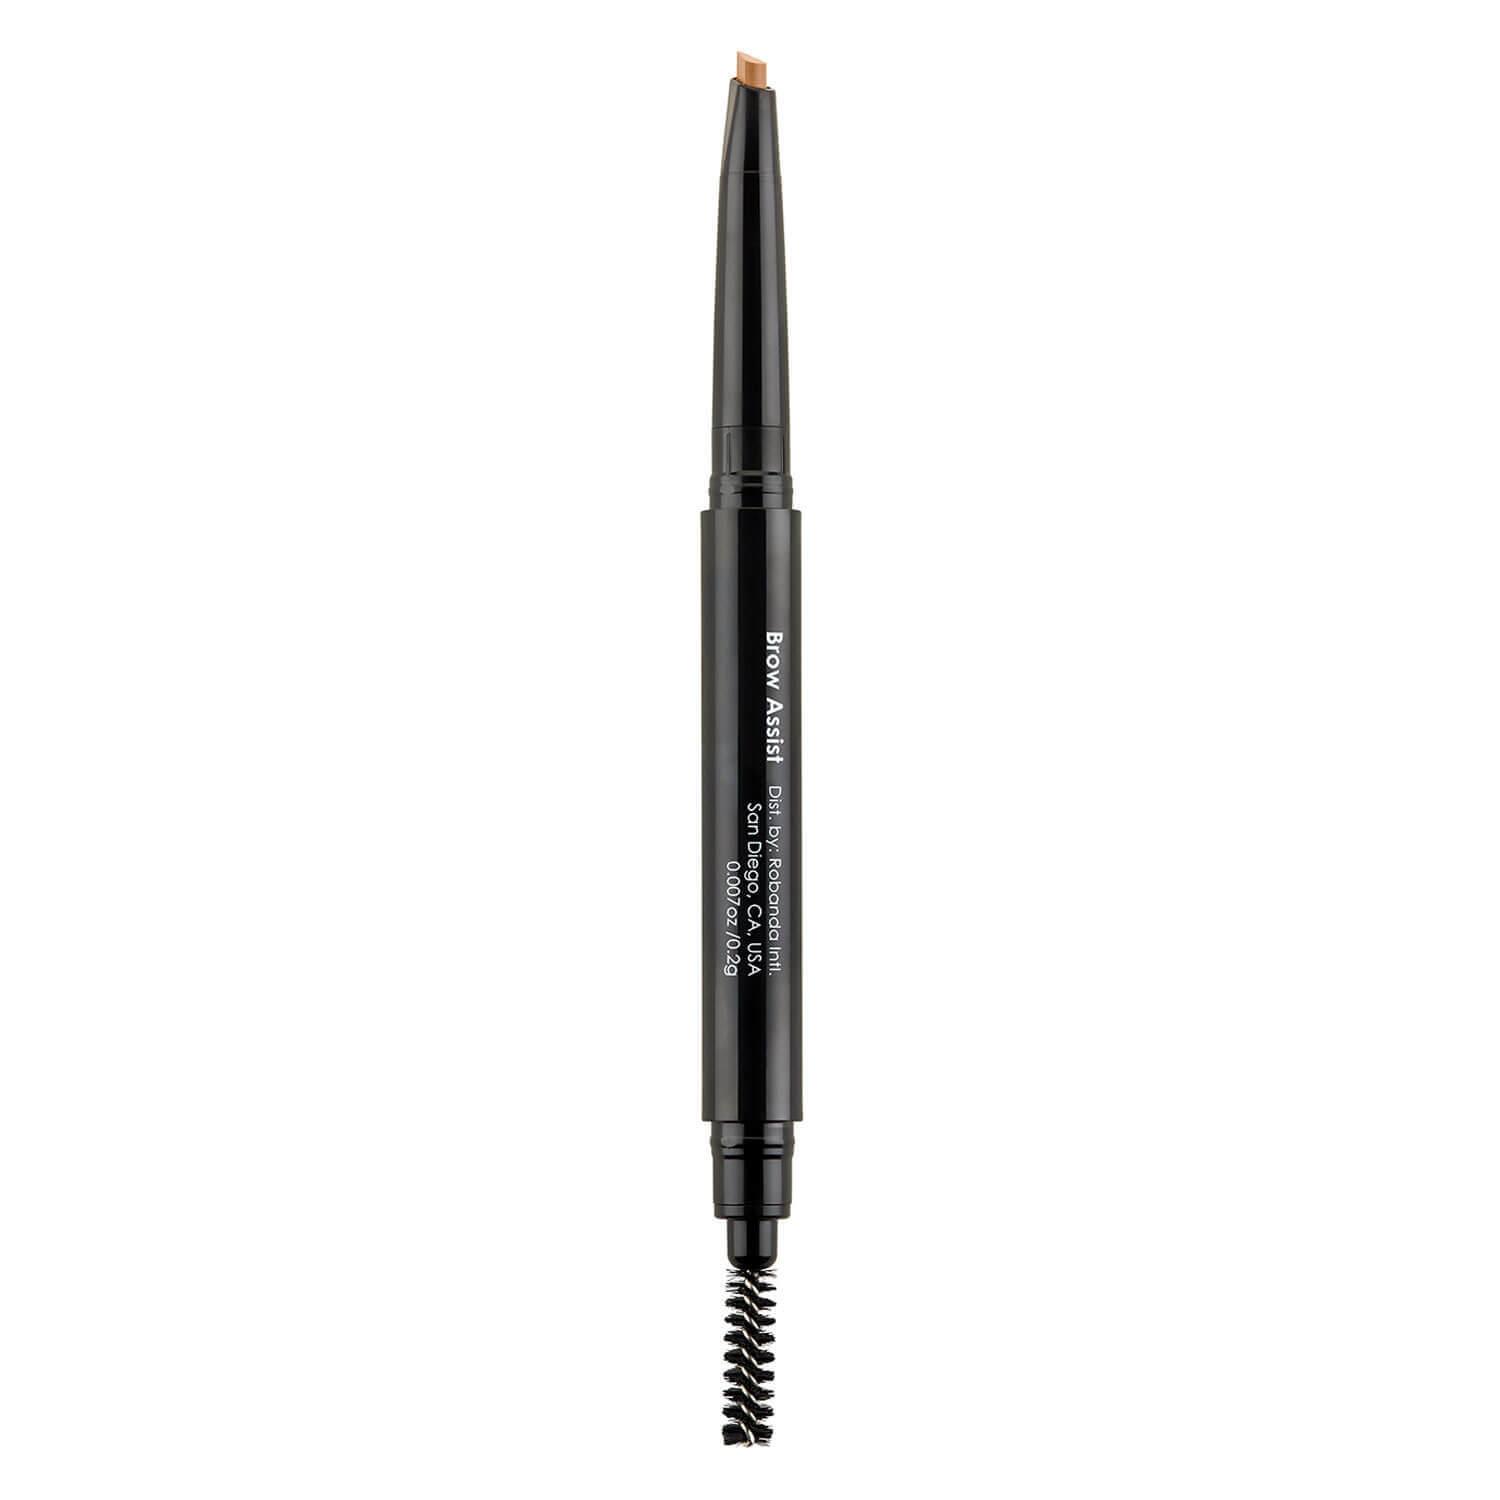 bodyography Eyes - Brow Assist Brown